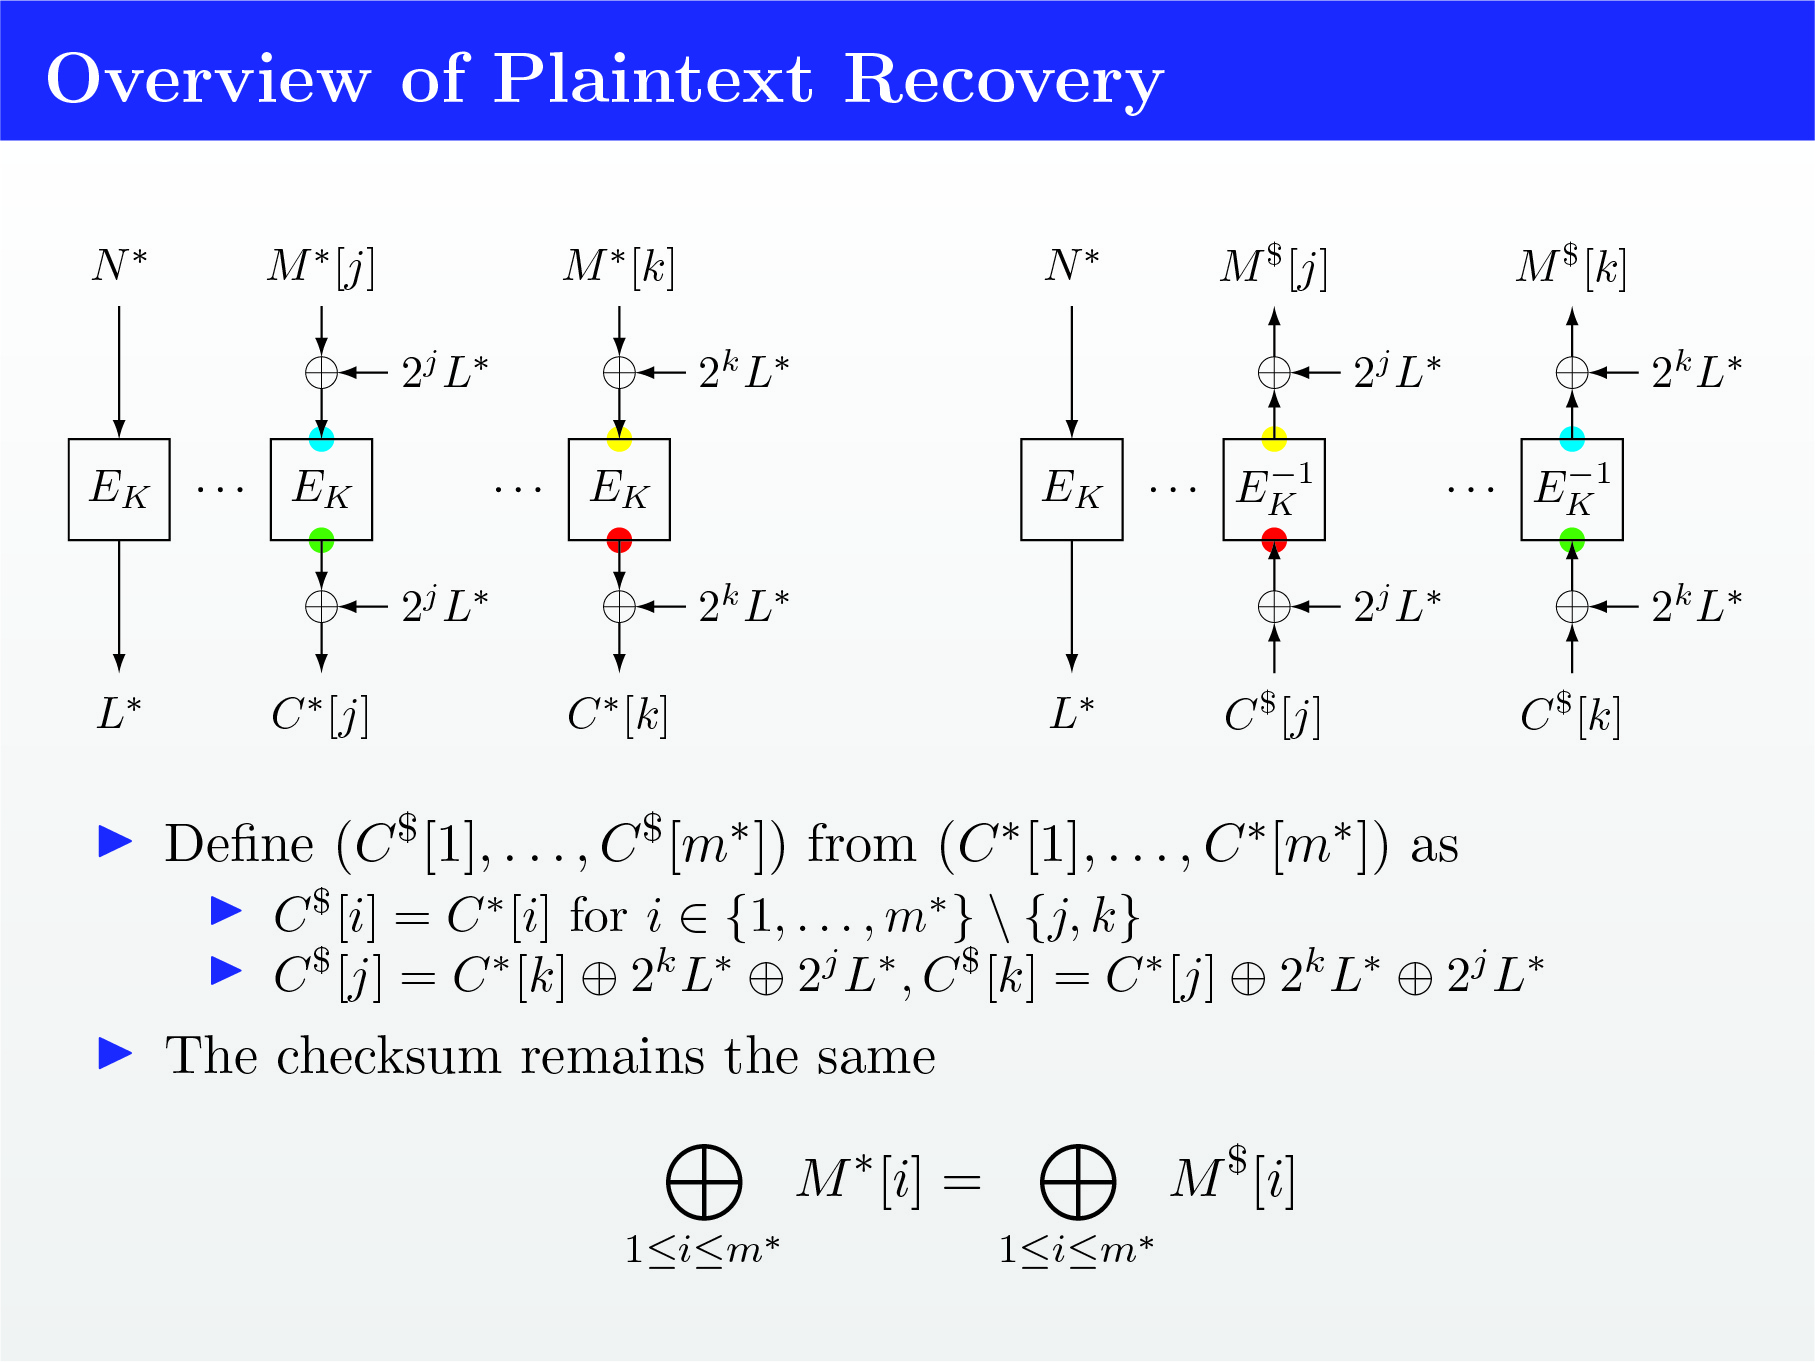 Overview of the plaintext recovery attack